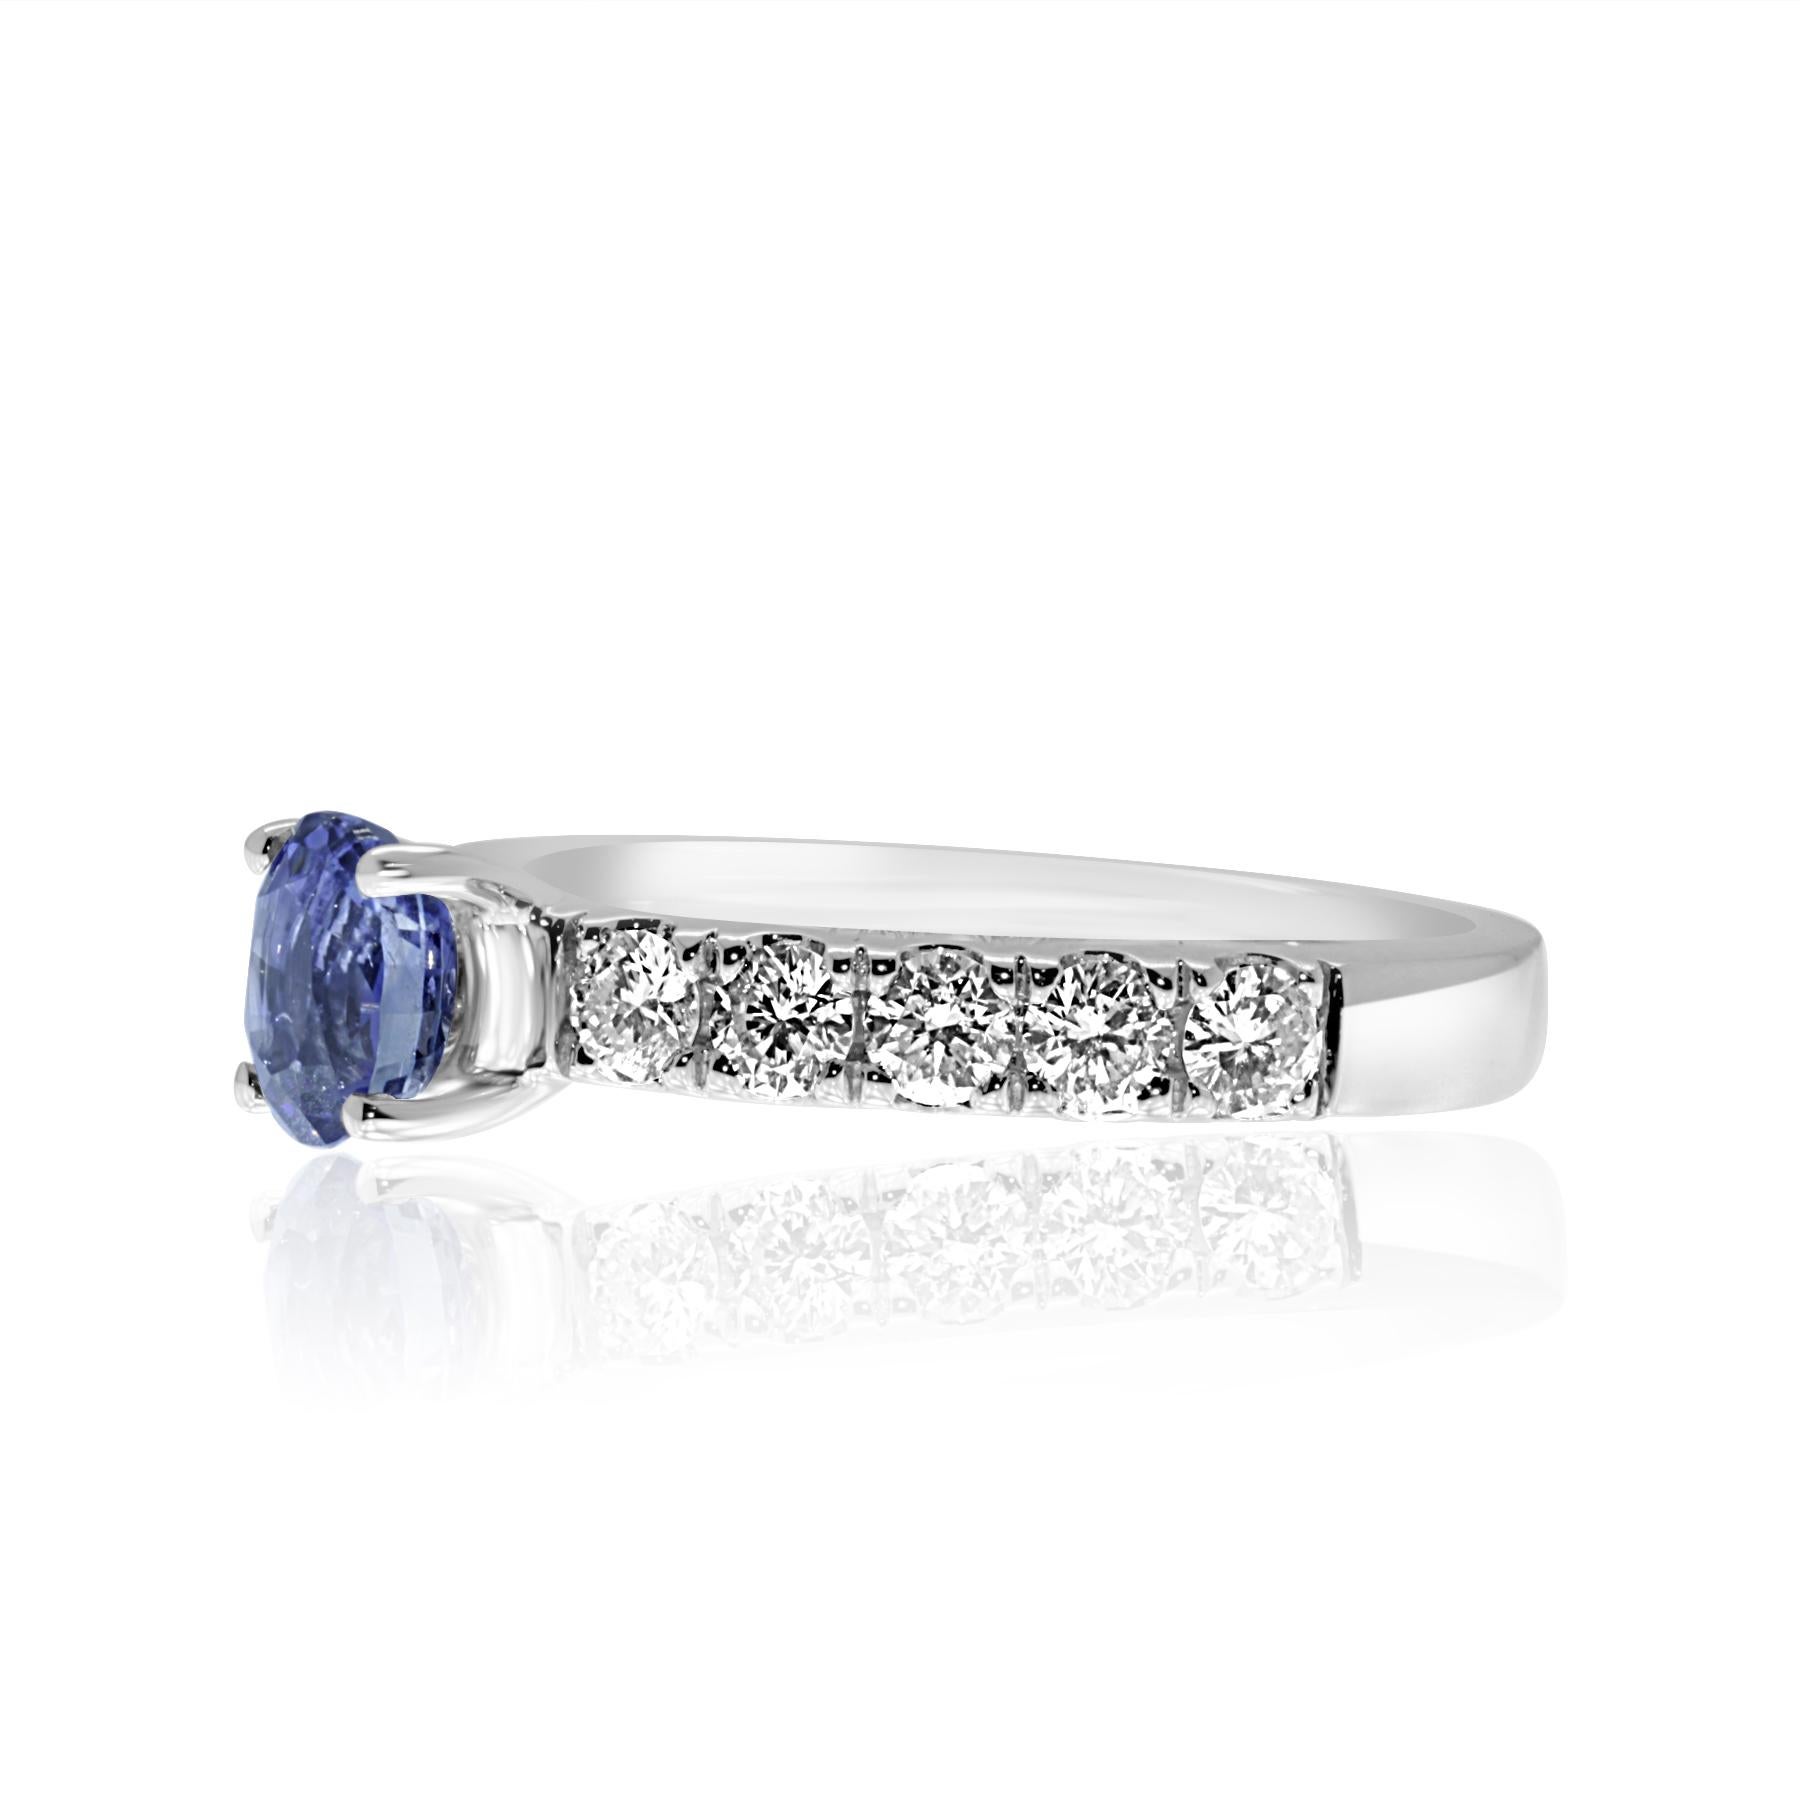 while most engagement rings contain only diamonds why not be different and go for a blue sapphire?

blue sapphires are believed to symbolise faithfulness and sincerity when given set in an engagement ring.
this gorgeous ring features an oval cut